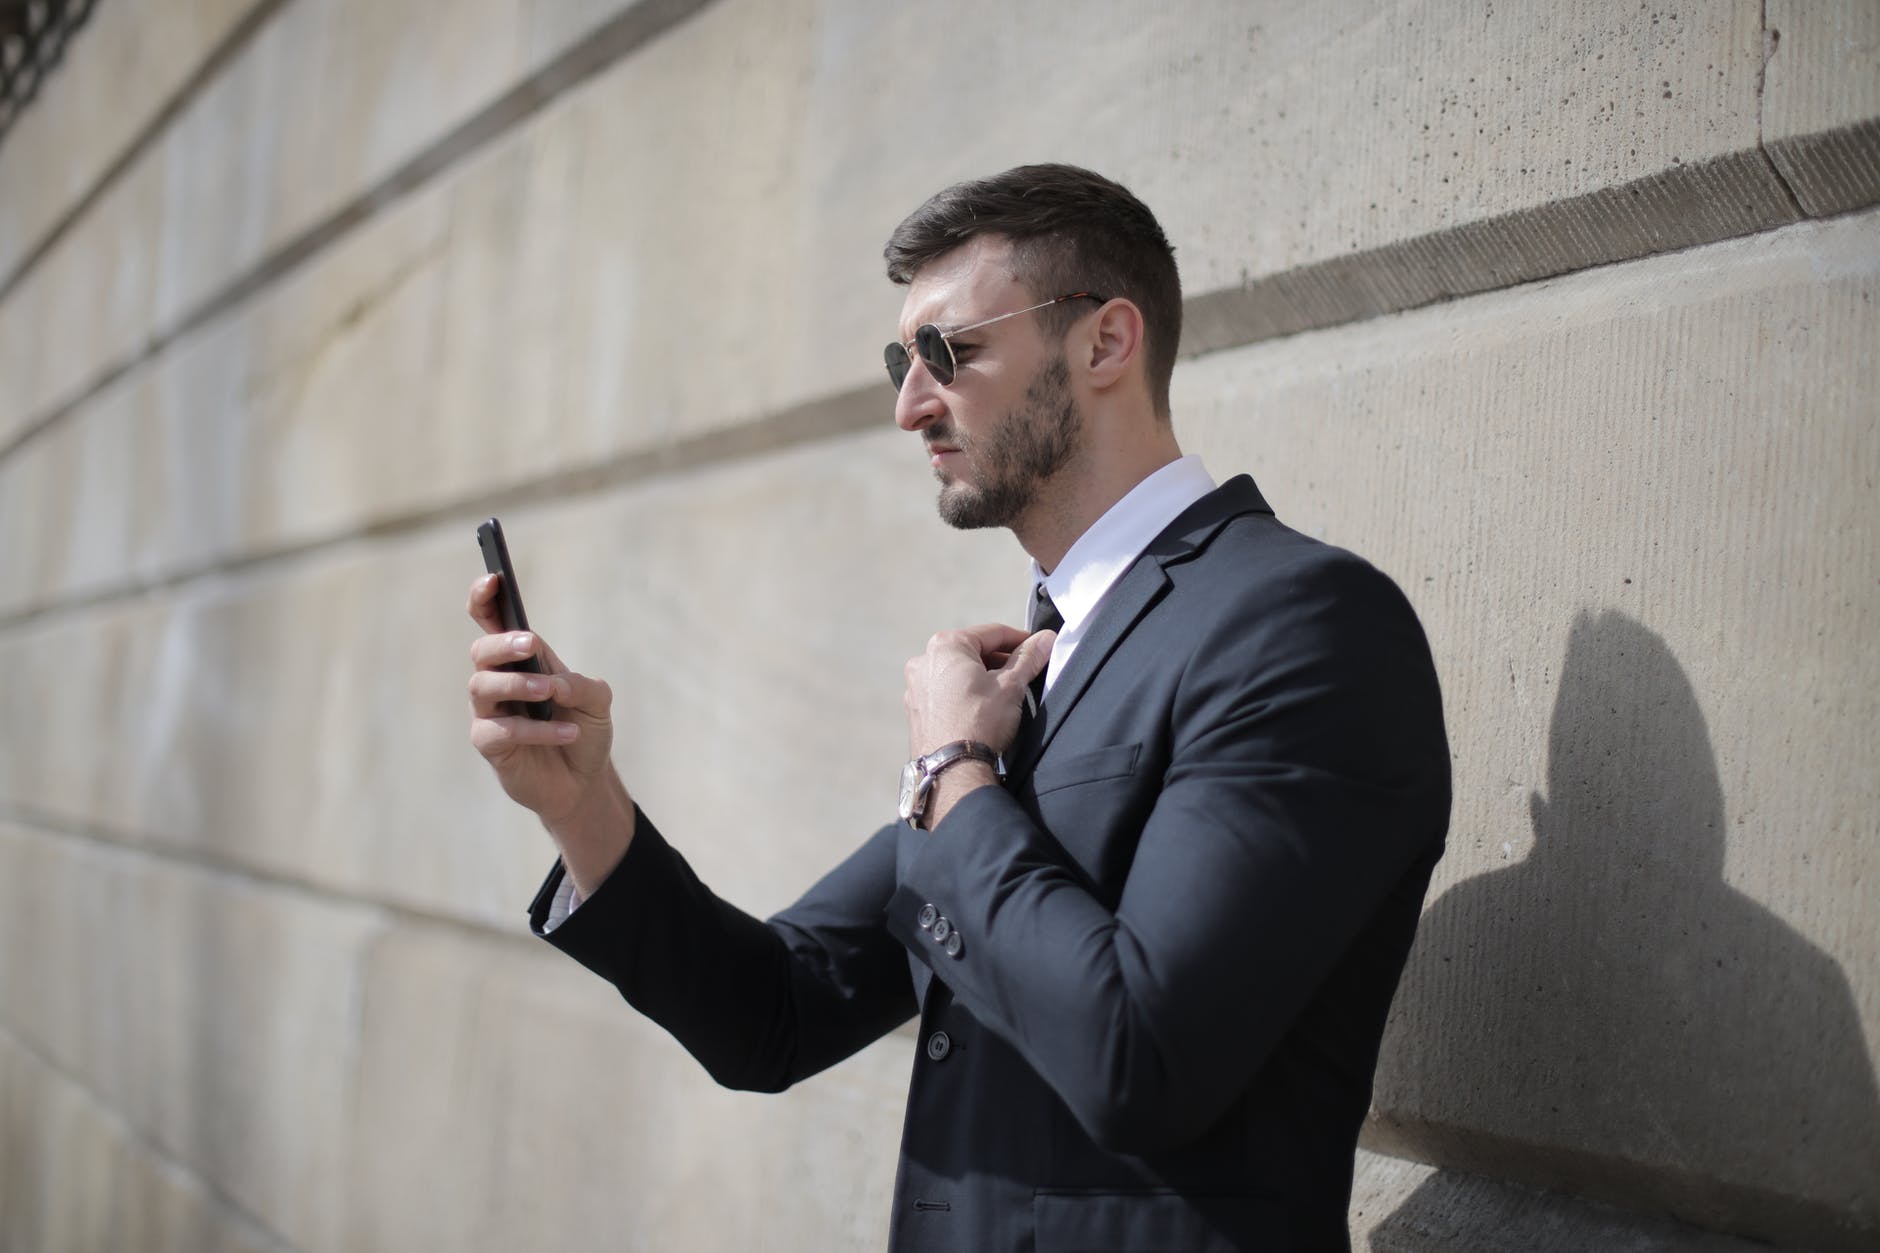 Man in a suit with his phone | Source: Pexels